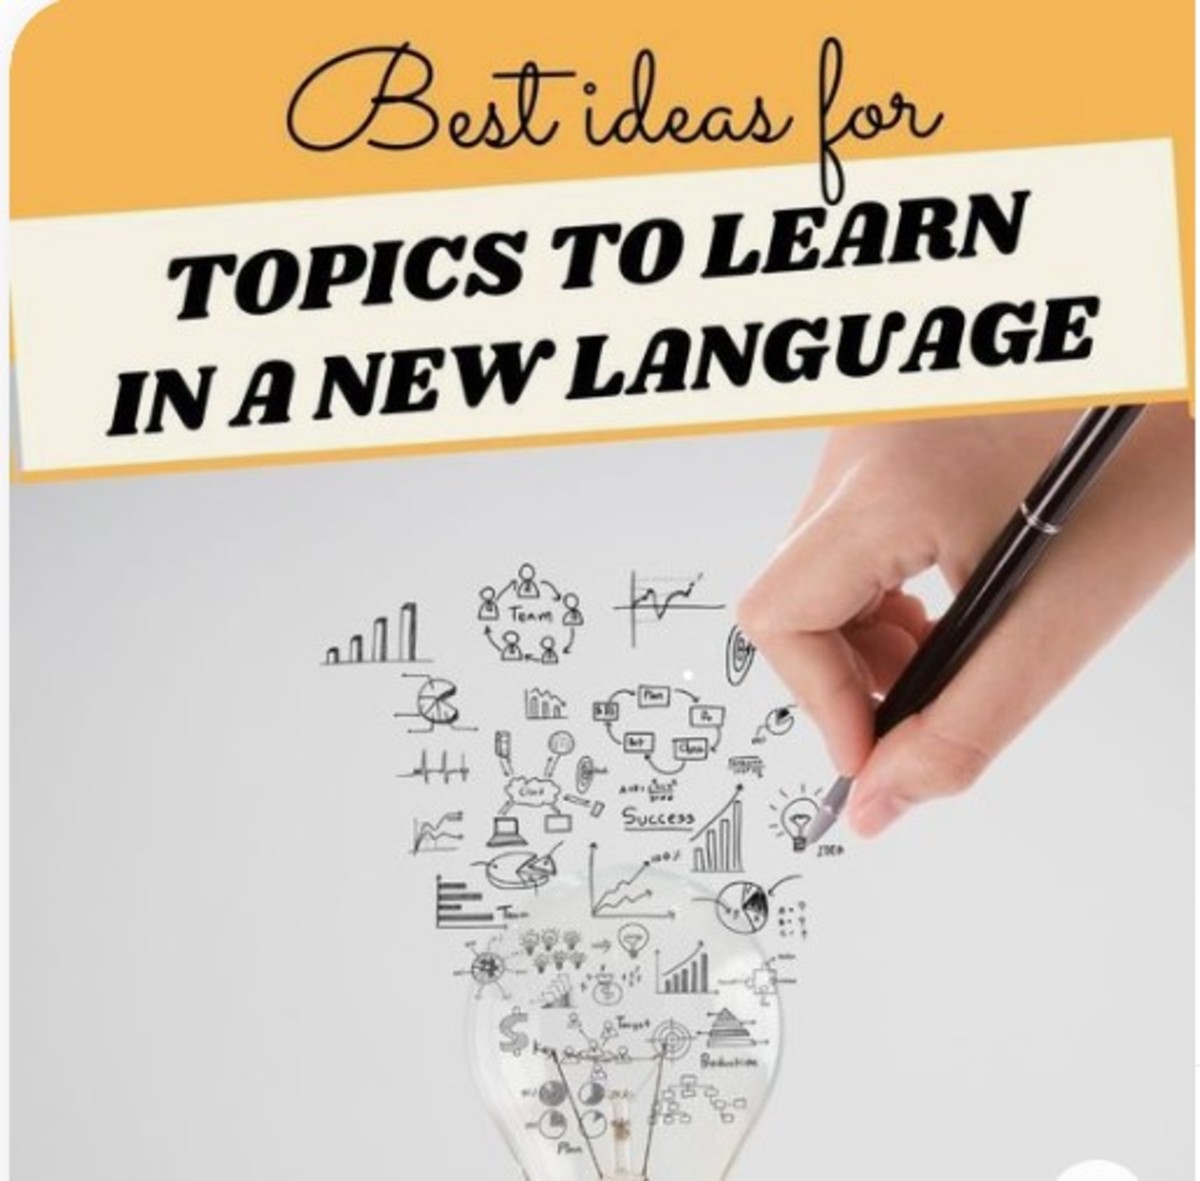 Learning a New Language in the Modern Era: 5 Easy Tips